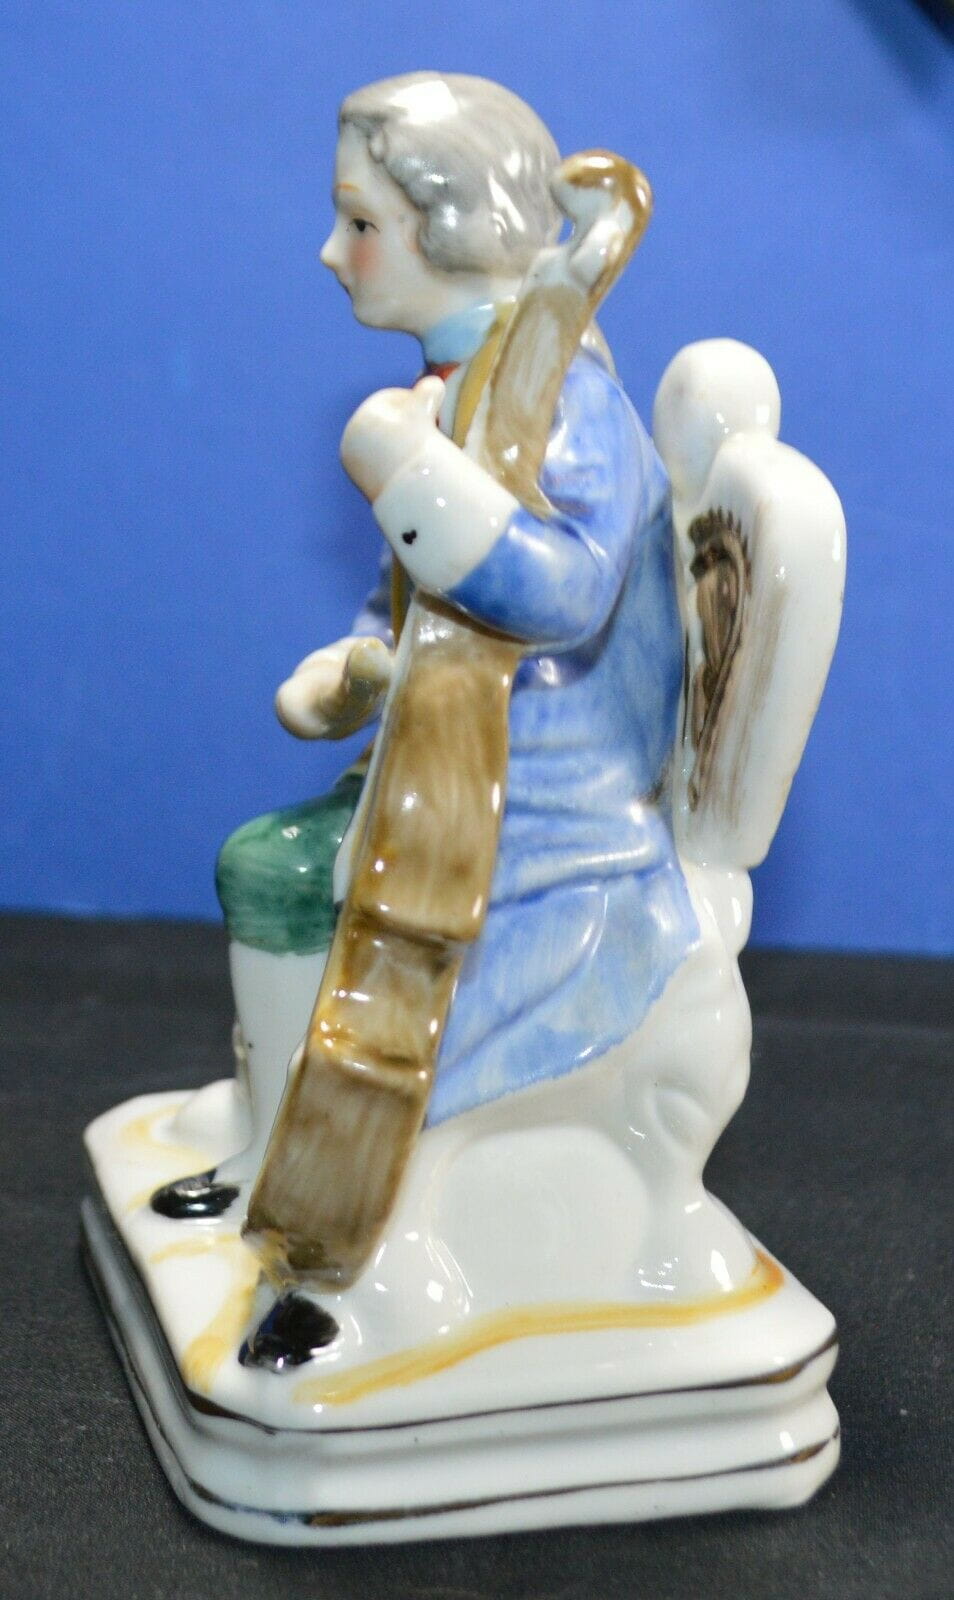 CELLO PLAYER DECORATIVE FIGURINE( PREVIOUSLY OWNED) GOOD CONDITION - TMD167207